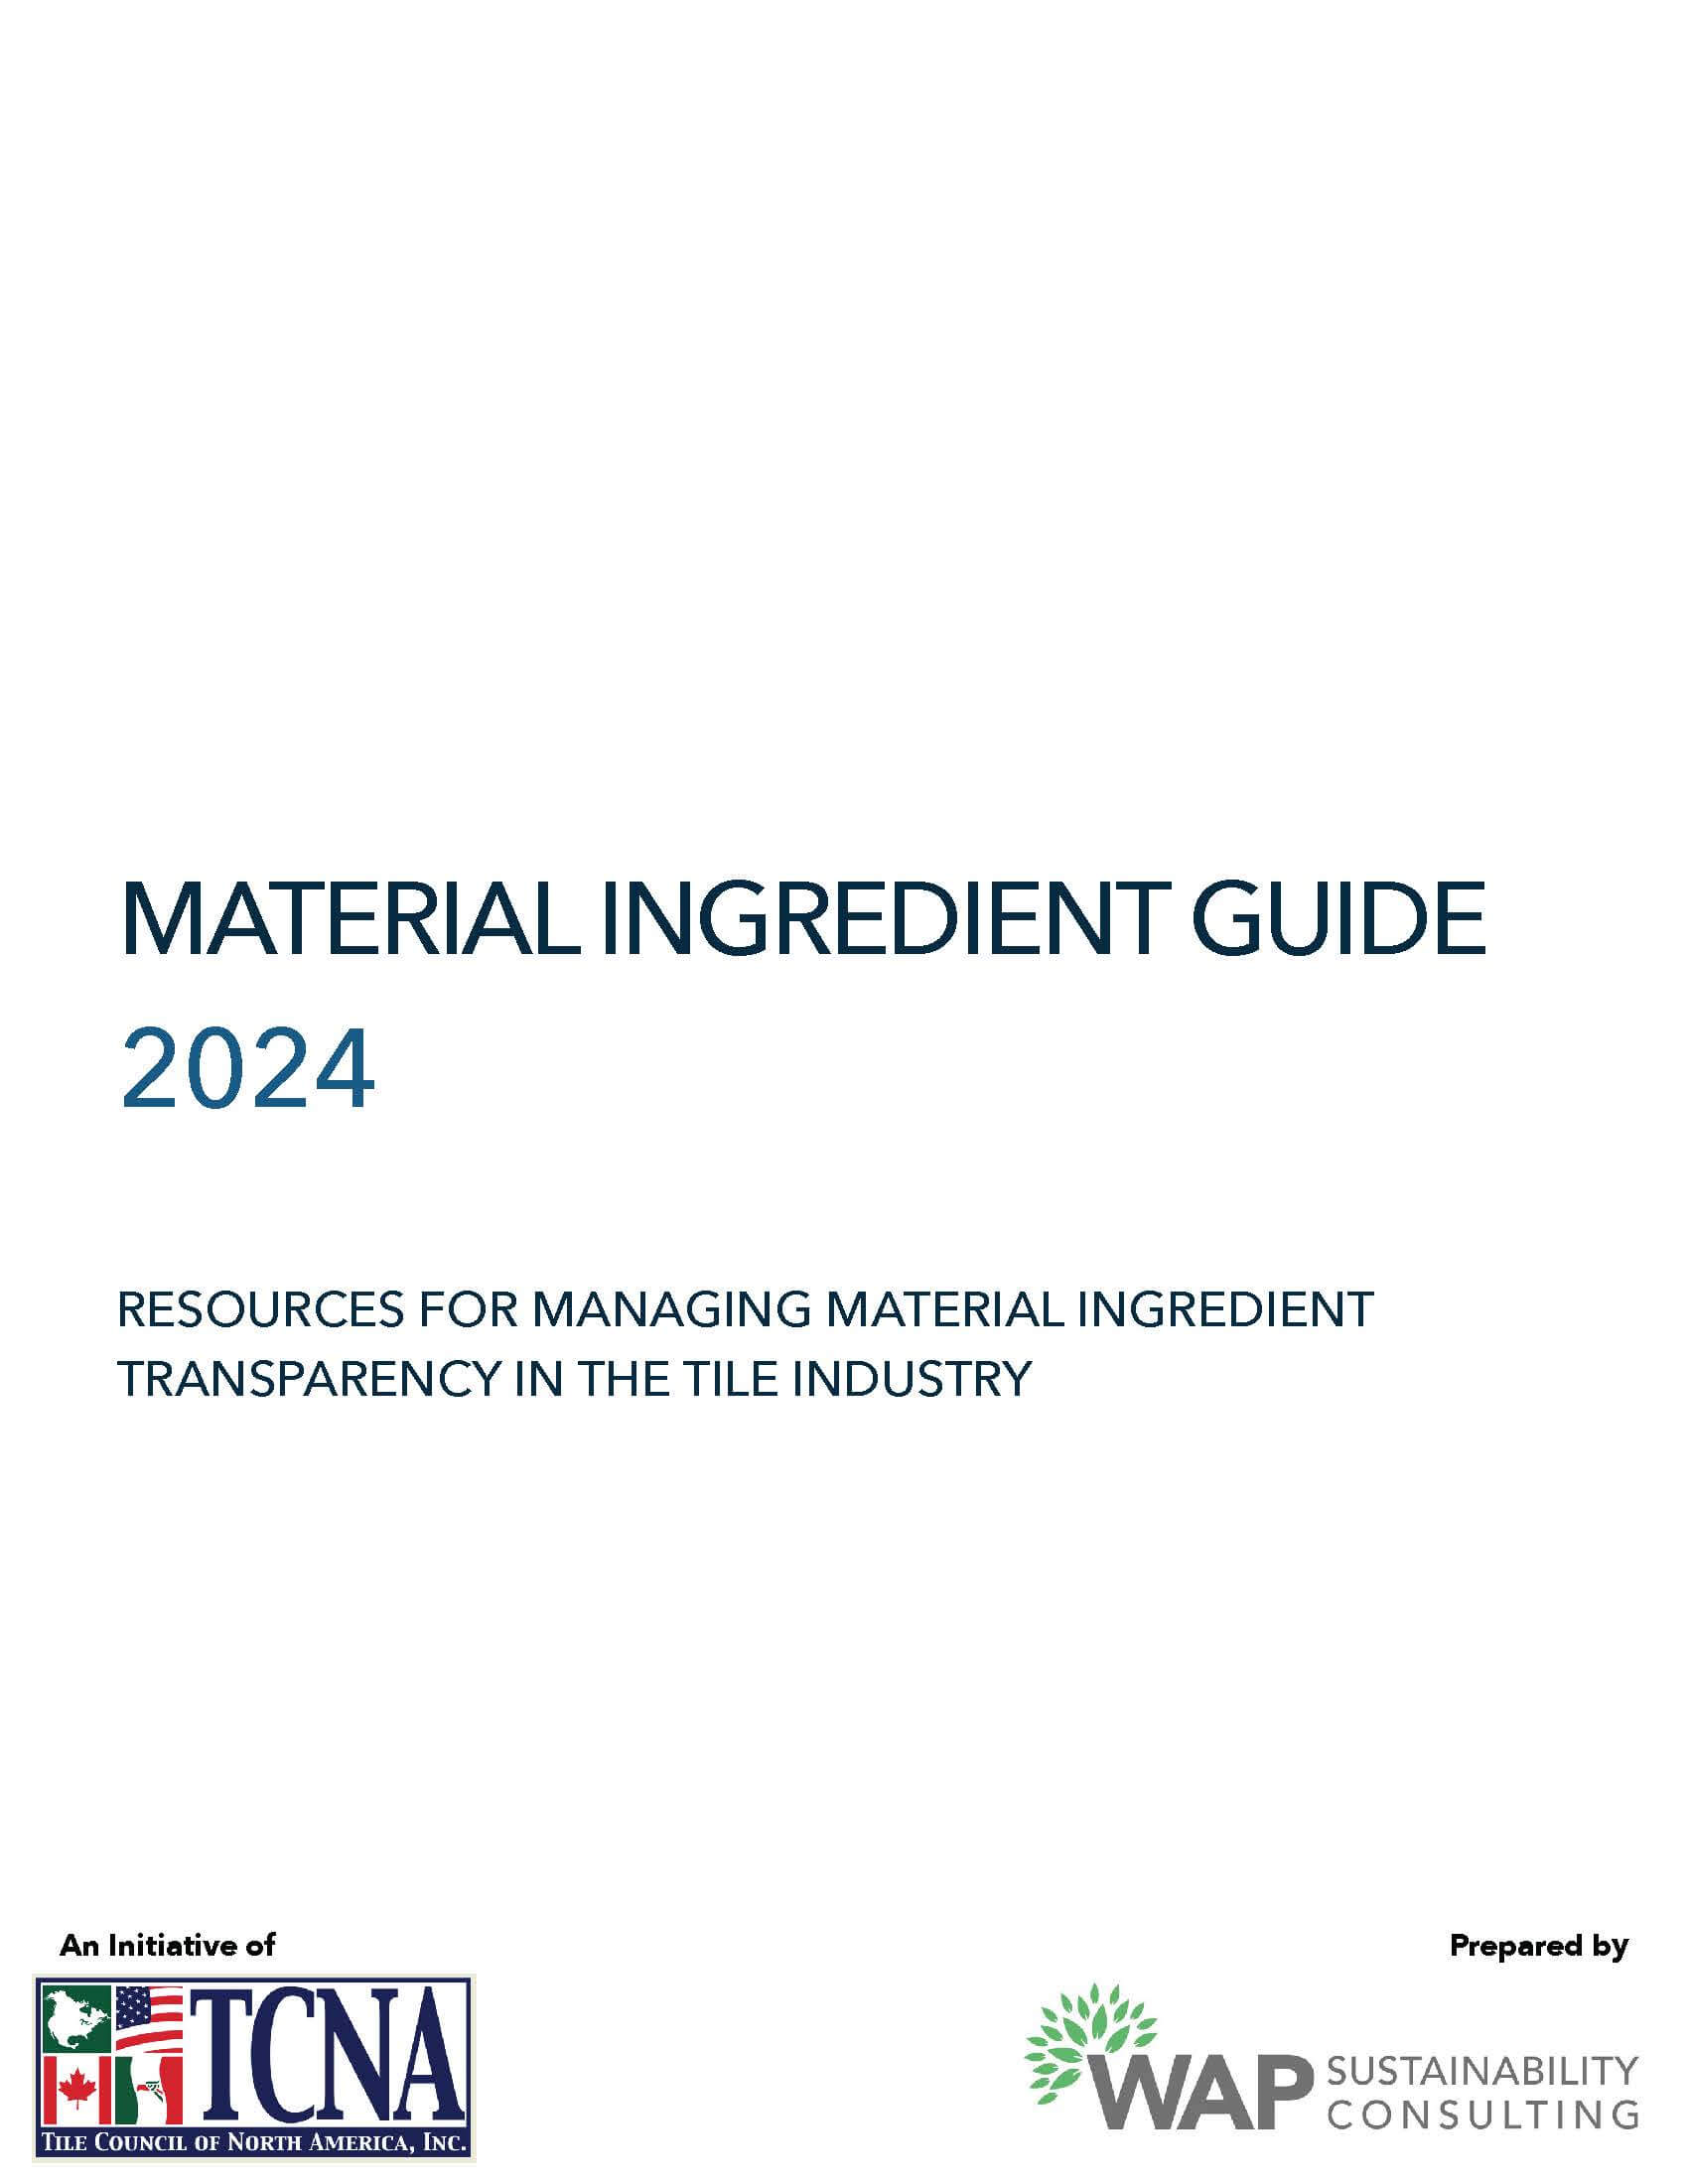 This guide is a resource for manufacturers to use when providing the content and chemical makeup of their products.